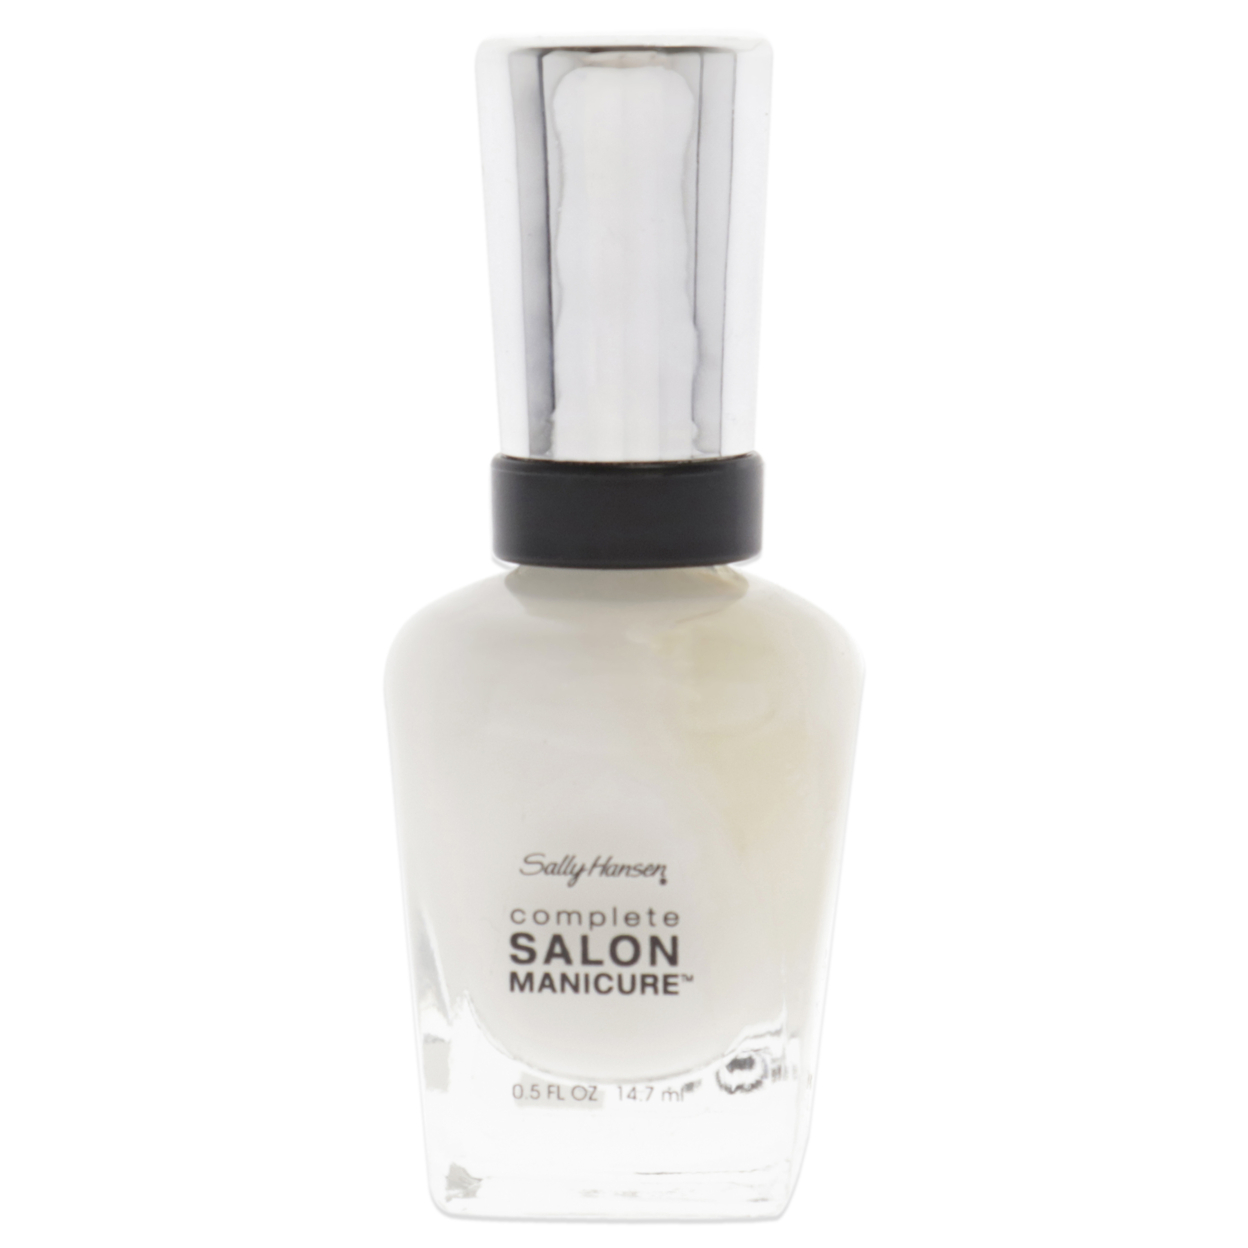 Sally Hansen Complete Salon Manicure Nail Color, Let's Snow - image 1 of 3